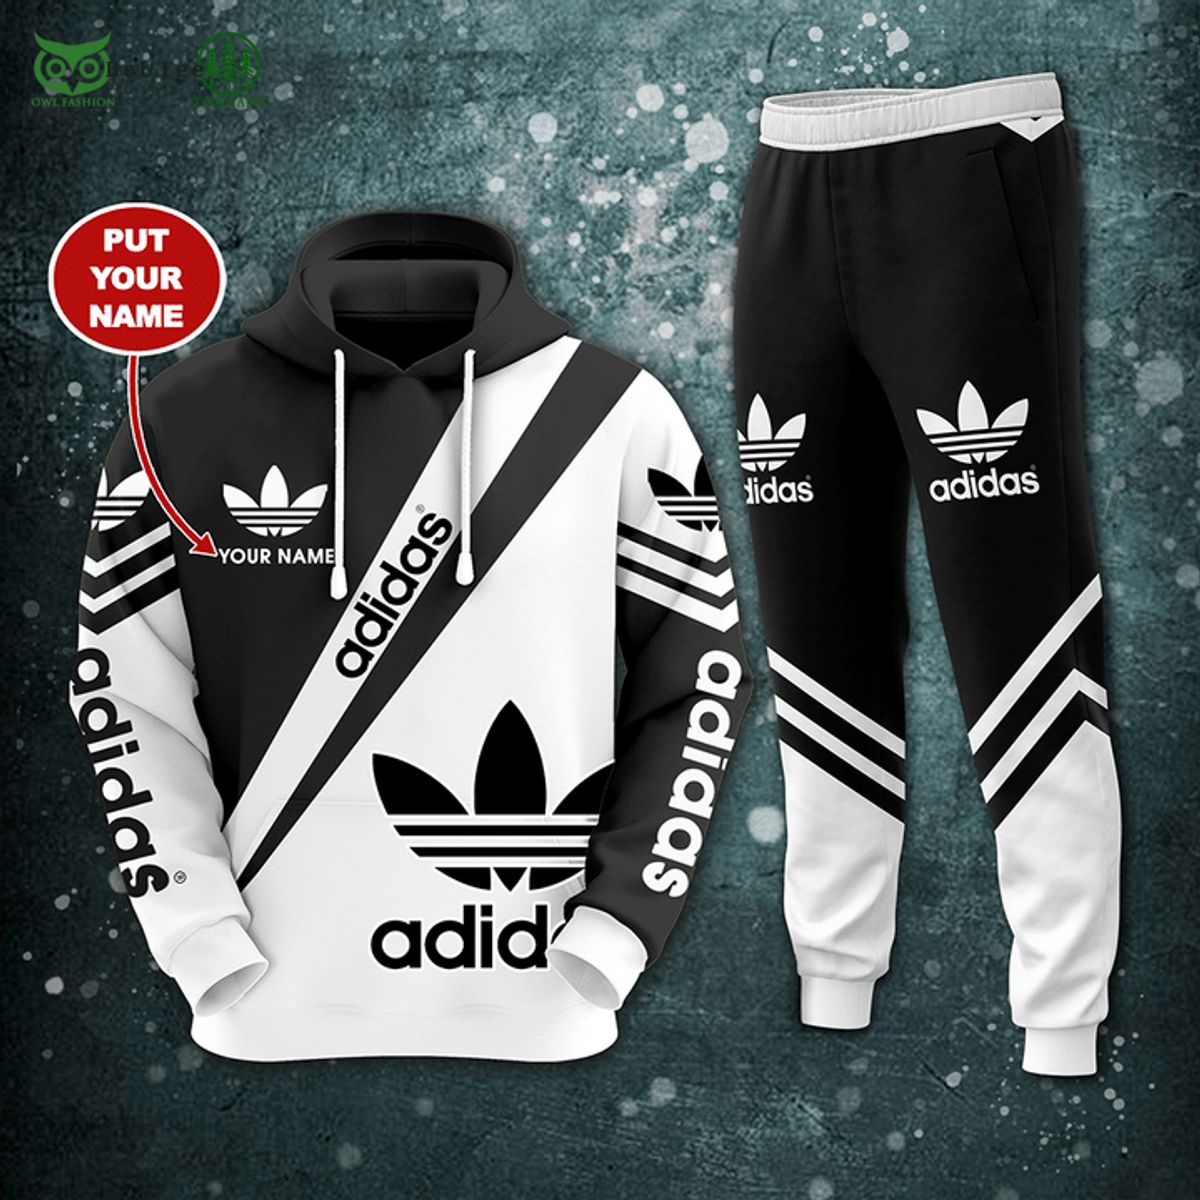 adidas famous sport brand black white personalized hoodie and pants 1 NuKY1